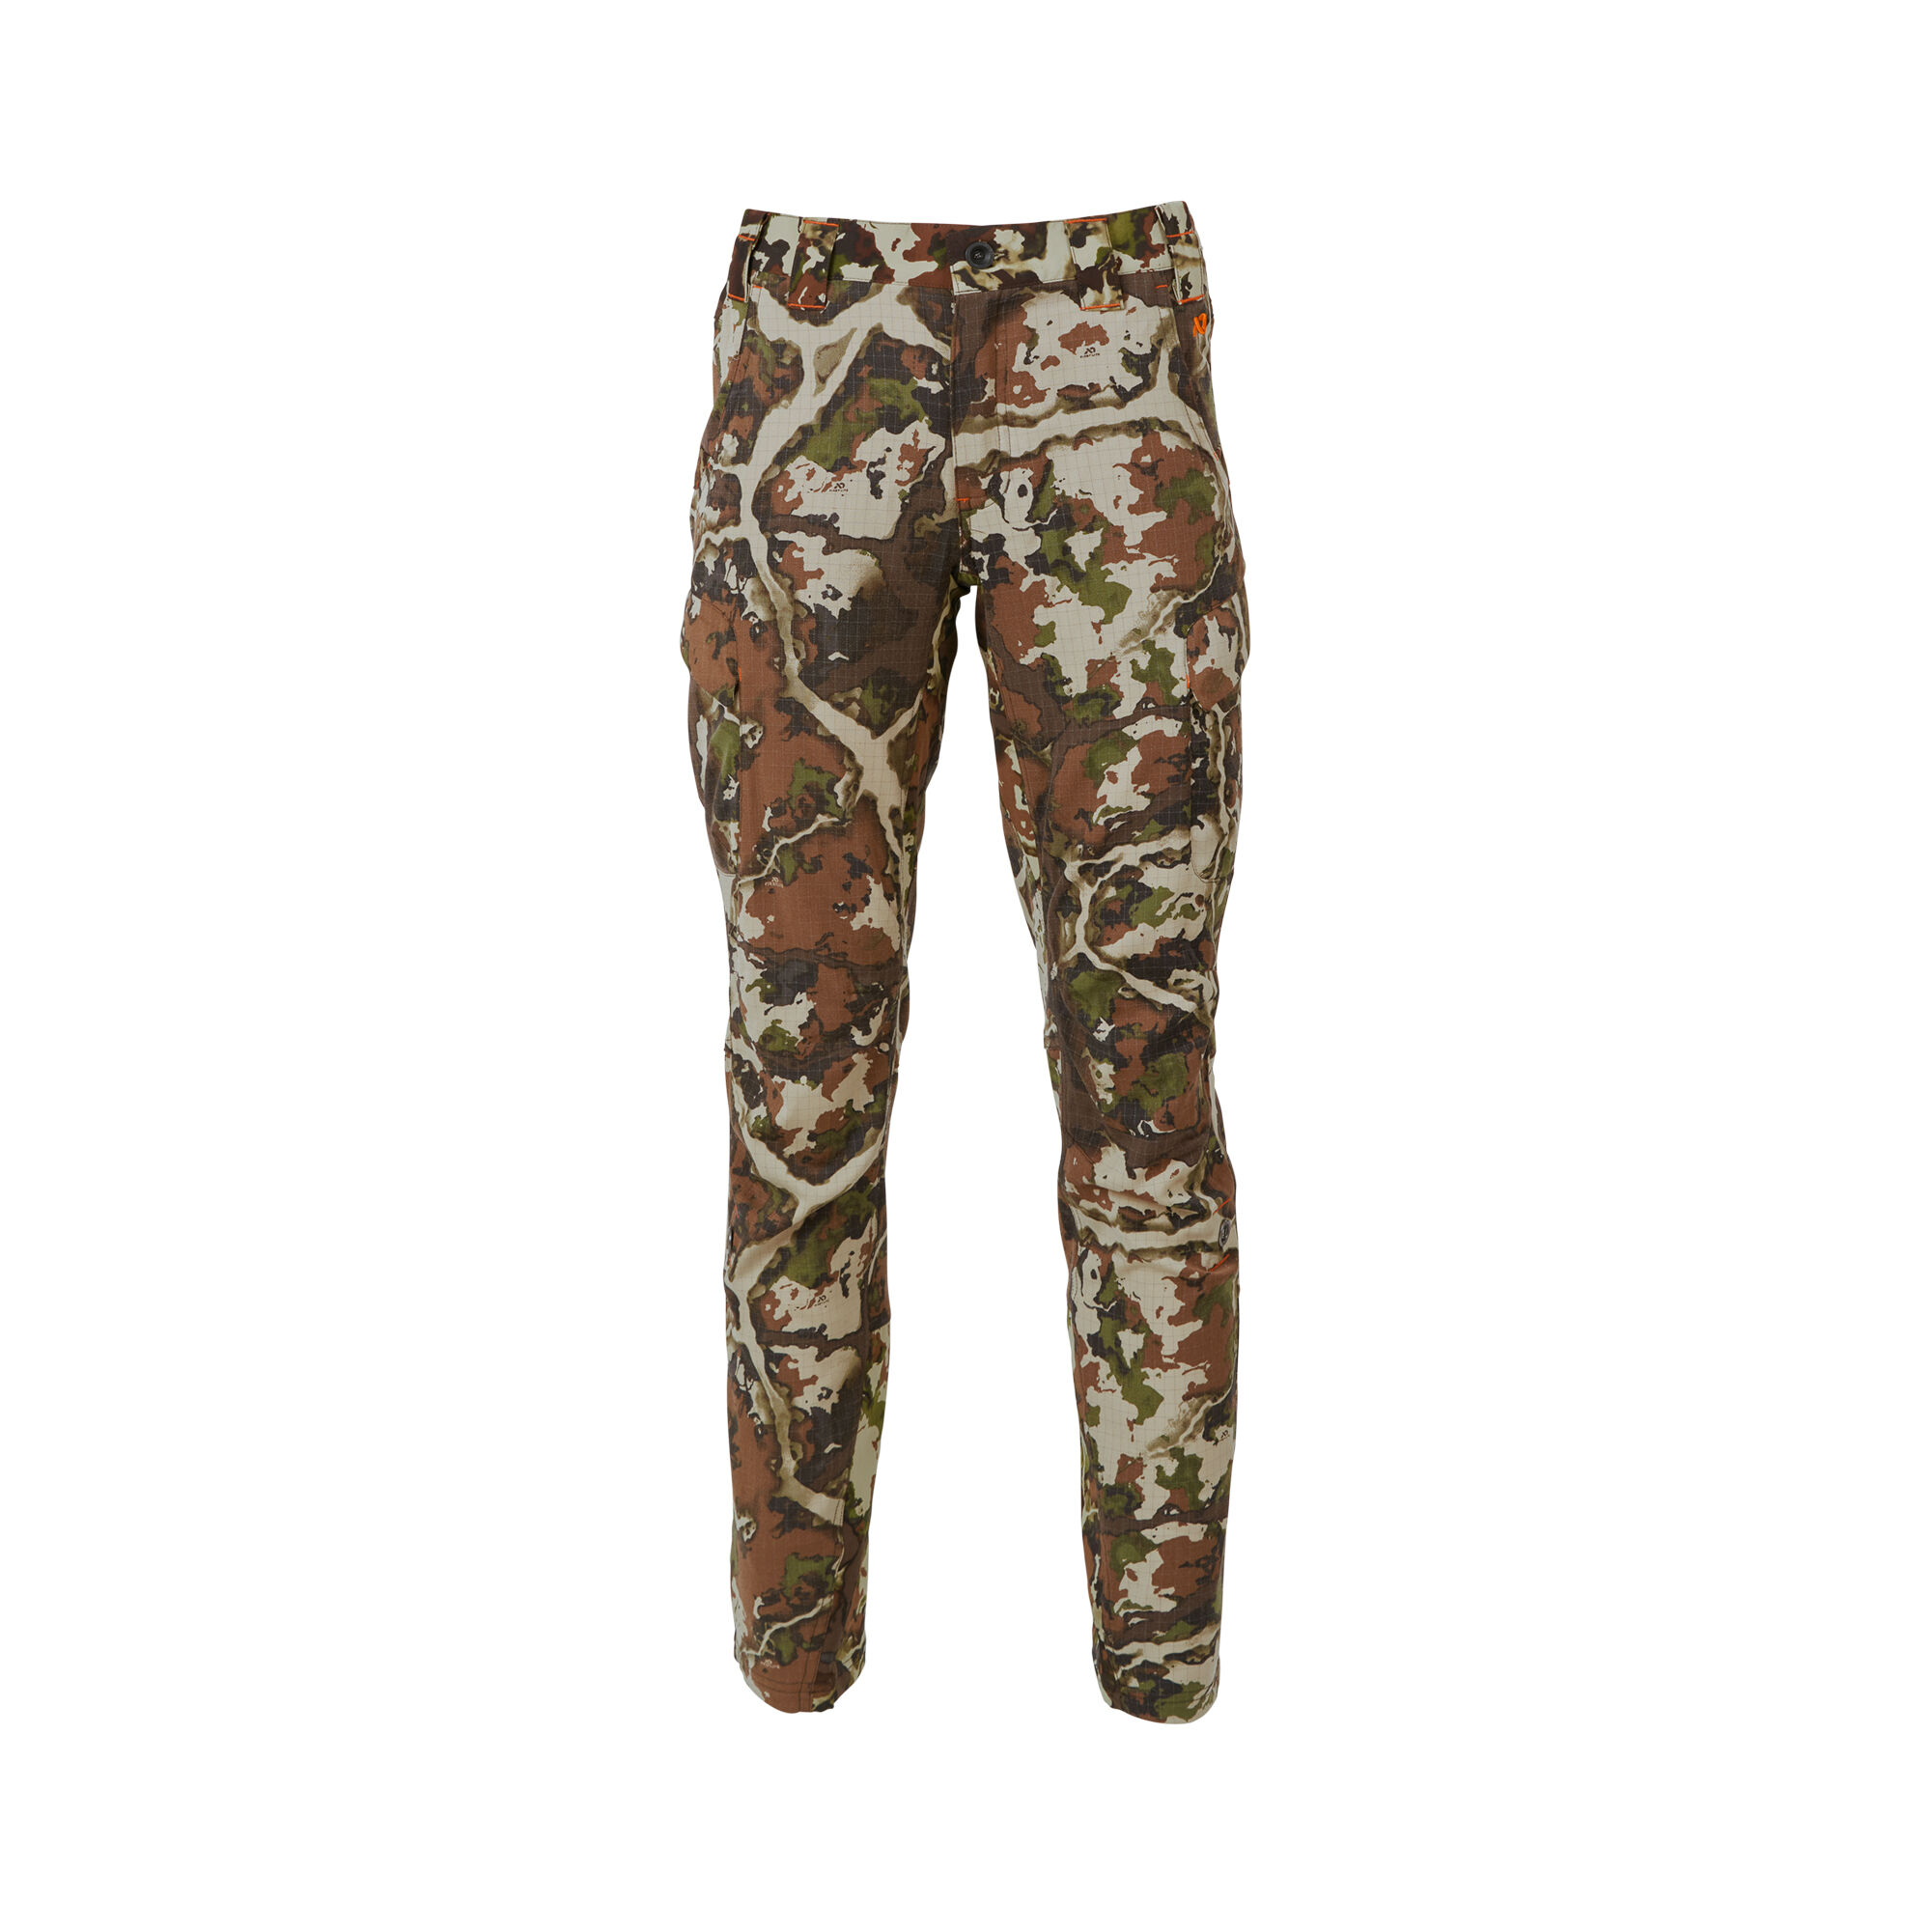 Womens Designer Camouflage Womens Camouflage Pants Stretchy, Loose Fit,  Casual Capris For Spring/Summer Wholesale Bulk Items With DHL Shipping  Style #9405 From Sell_clothing, $14.82 | DHgate.Com